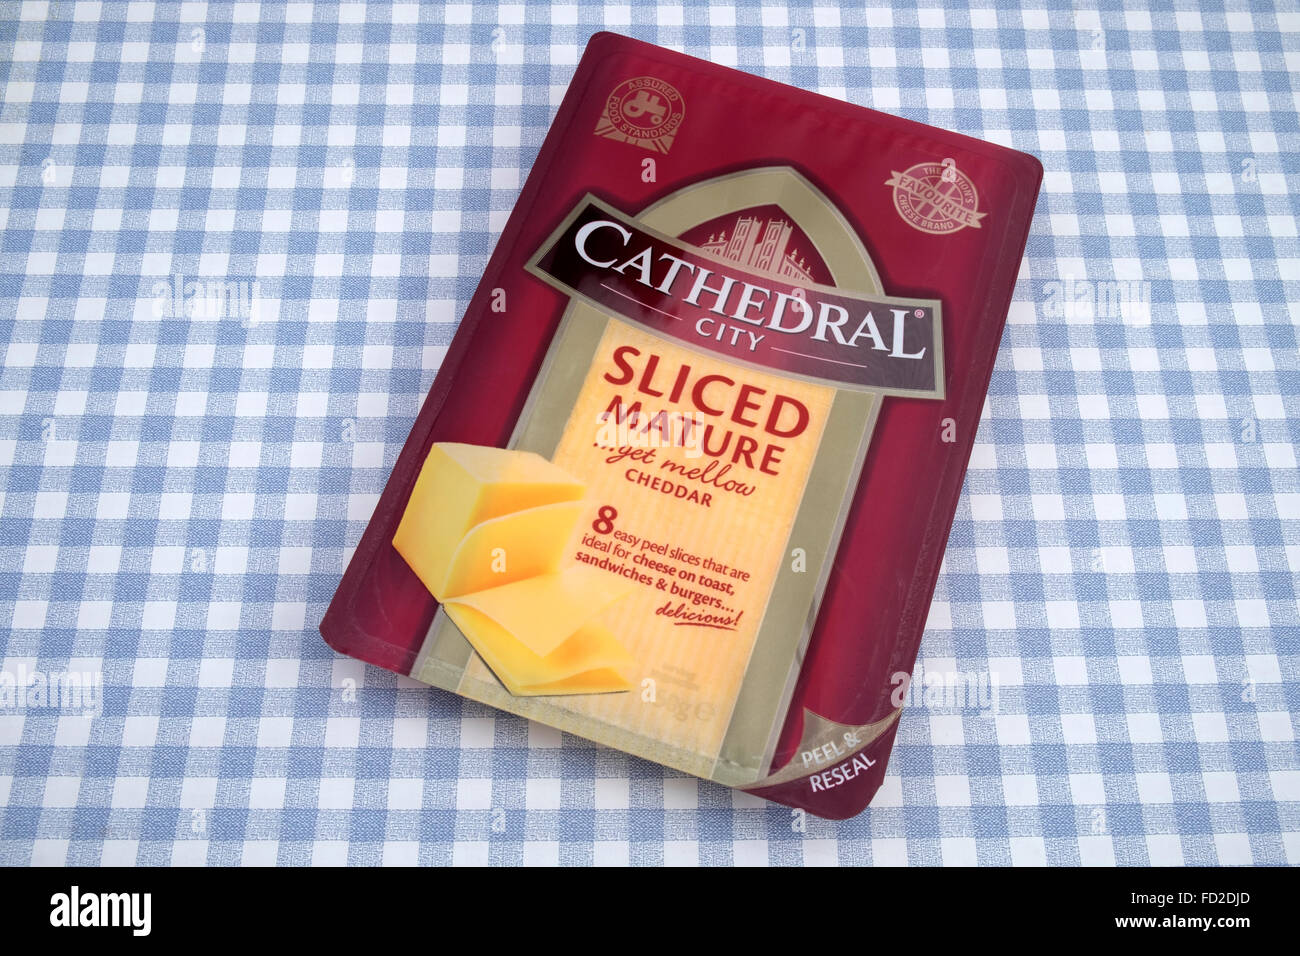 Cathedral City sliced mature cheddar cheese slices in resealable pack Stock Photo